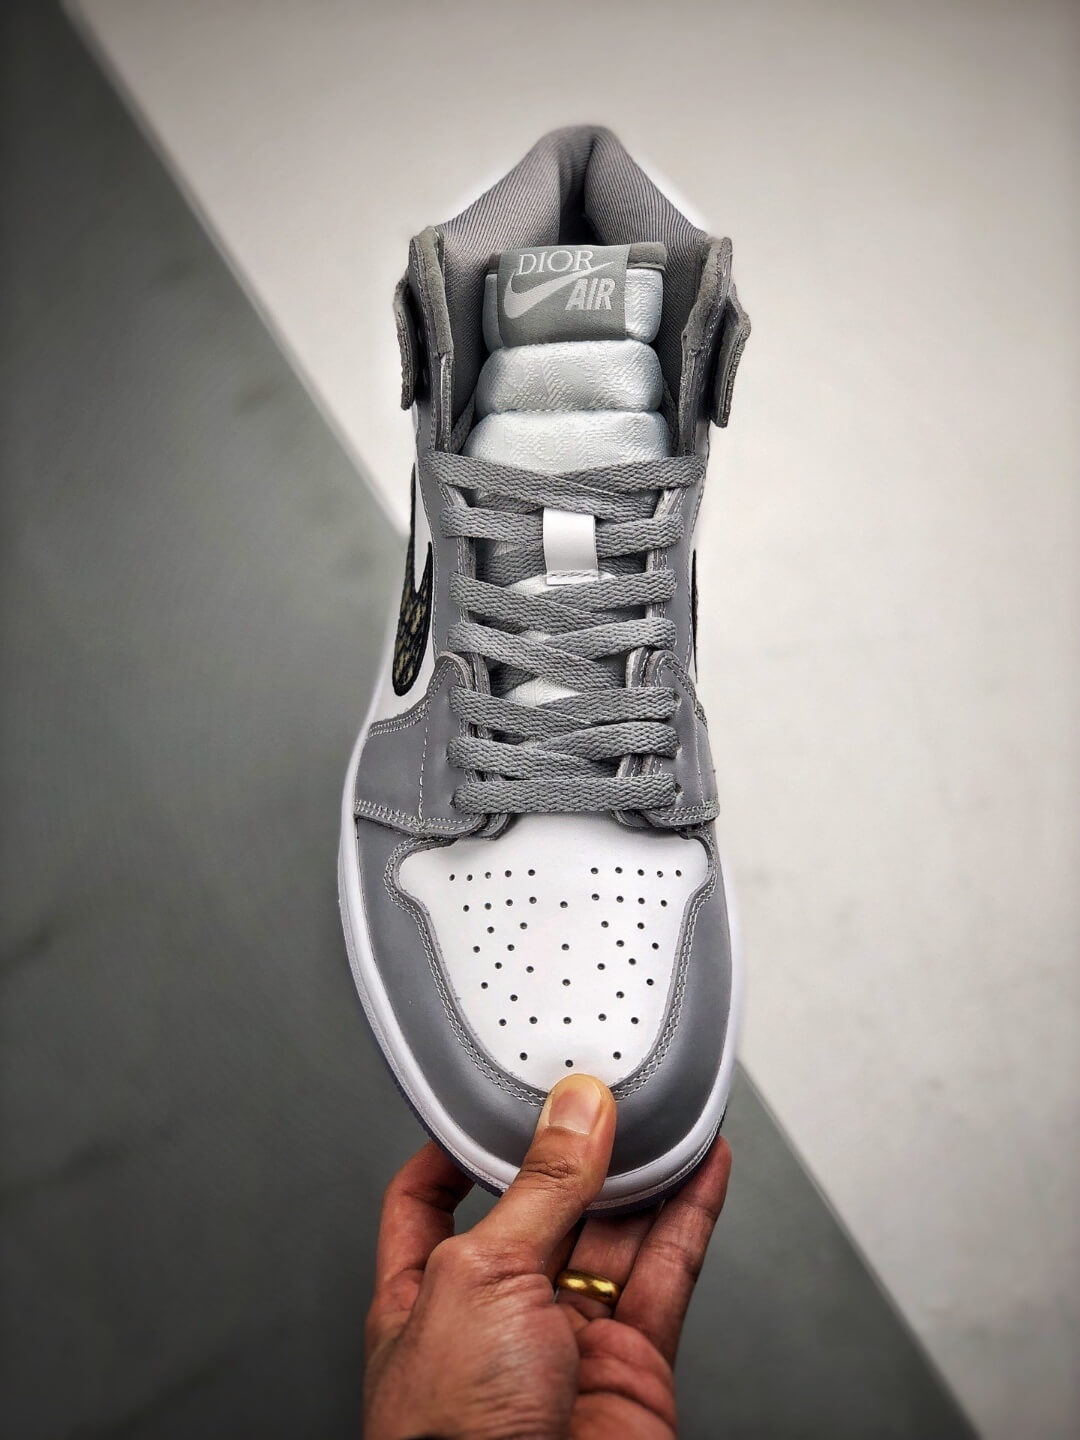 The Dior x Air Jordan 1 High Sneaker White and Grey Upper Top RepShoes 03